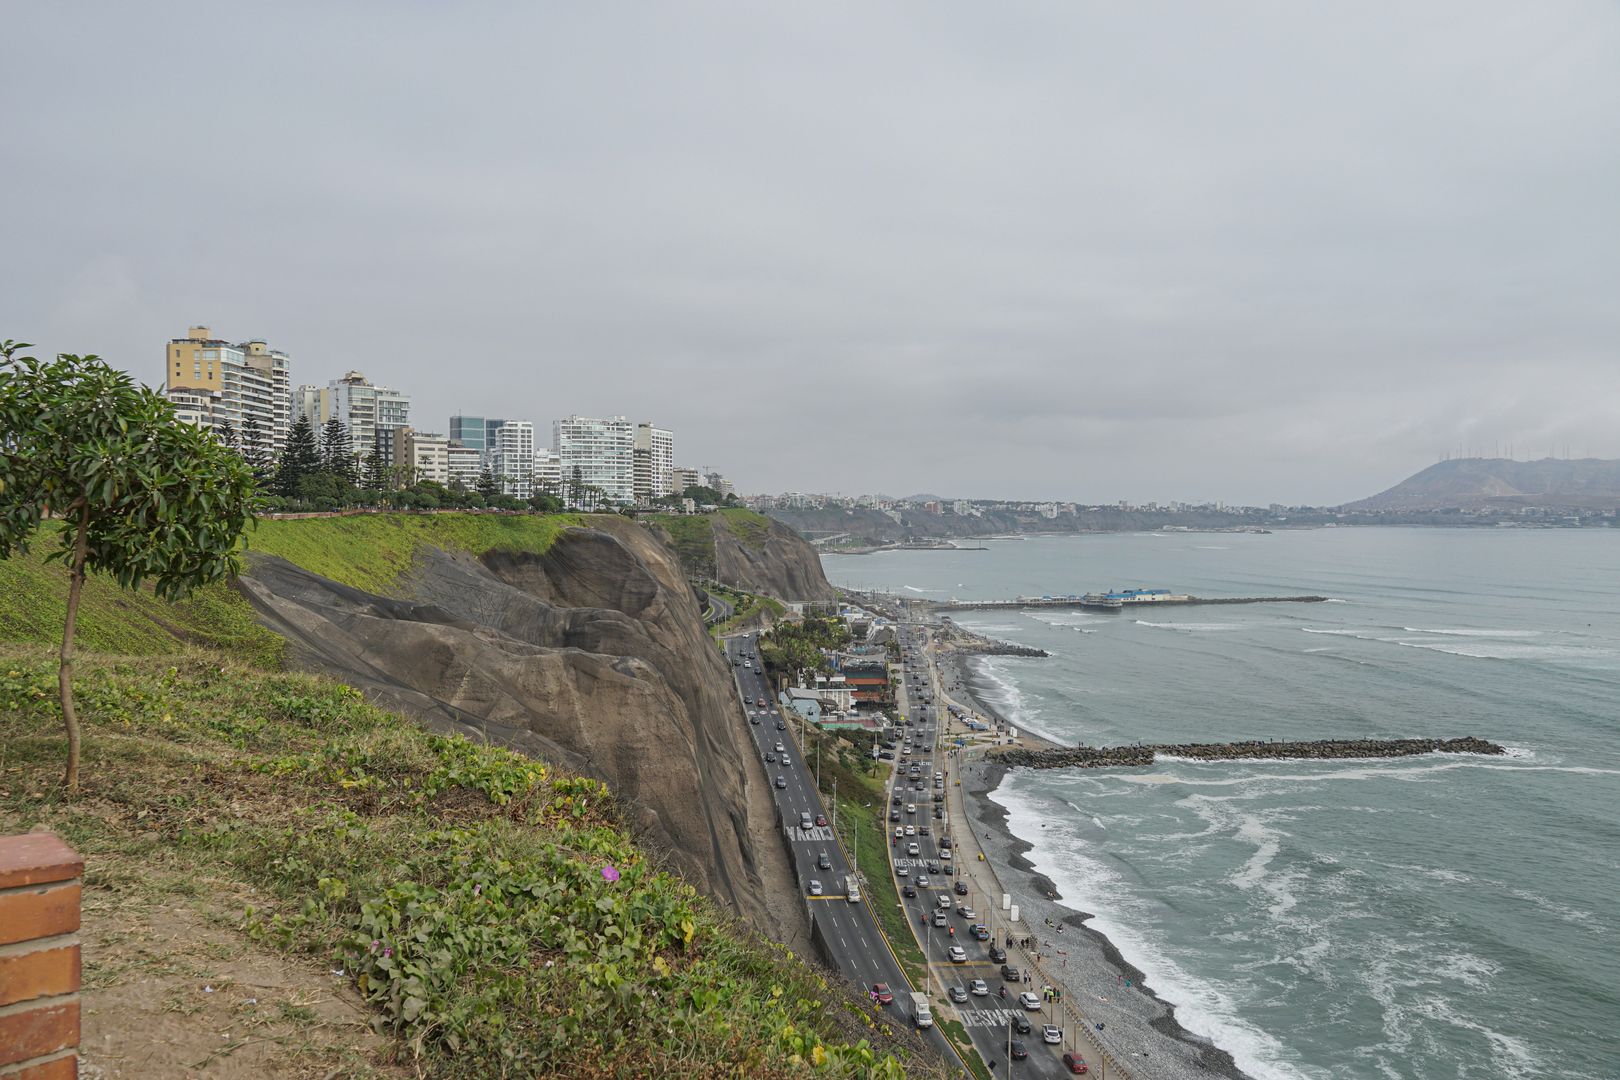 A cliff overlooking the ocean and a city.